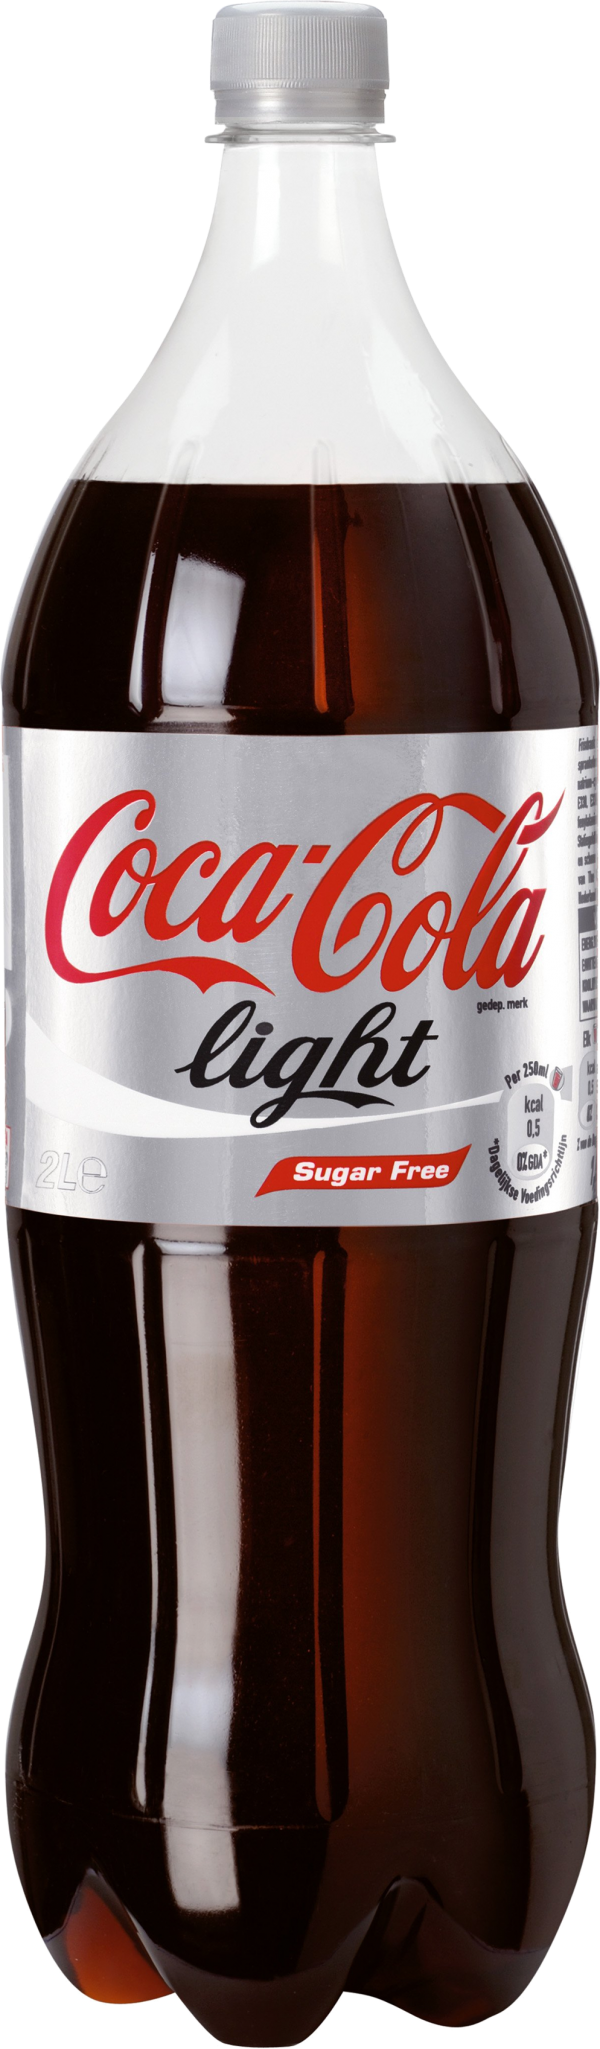 cocacola png free download 32